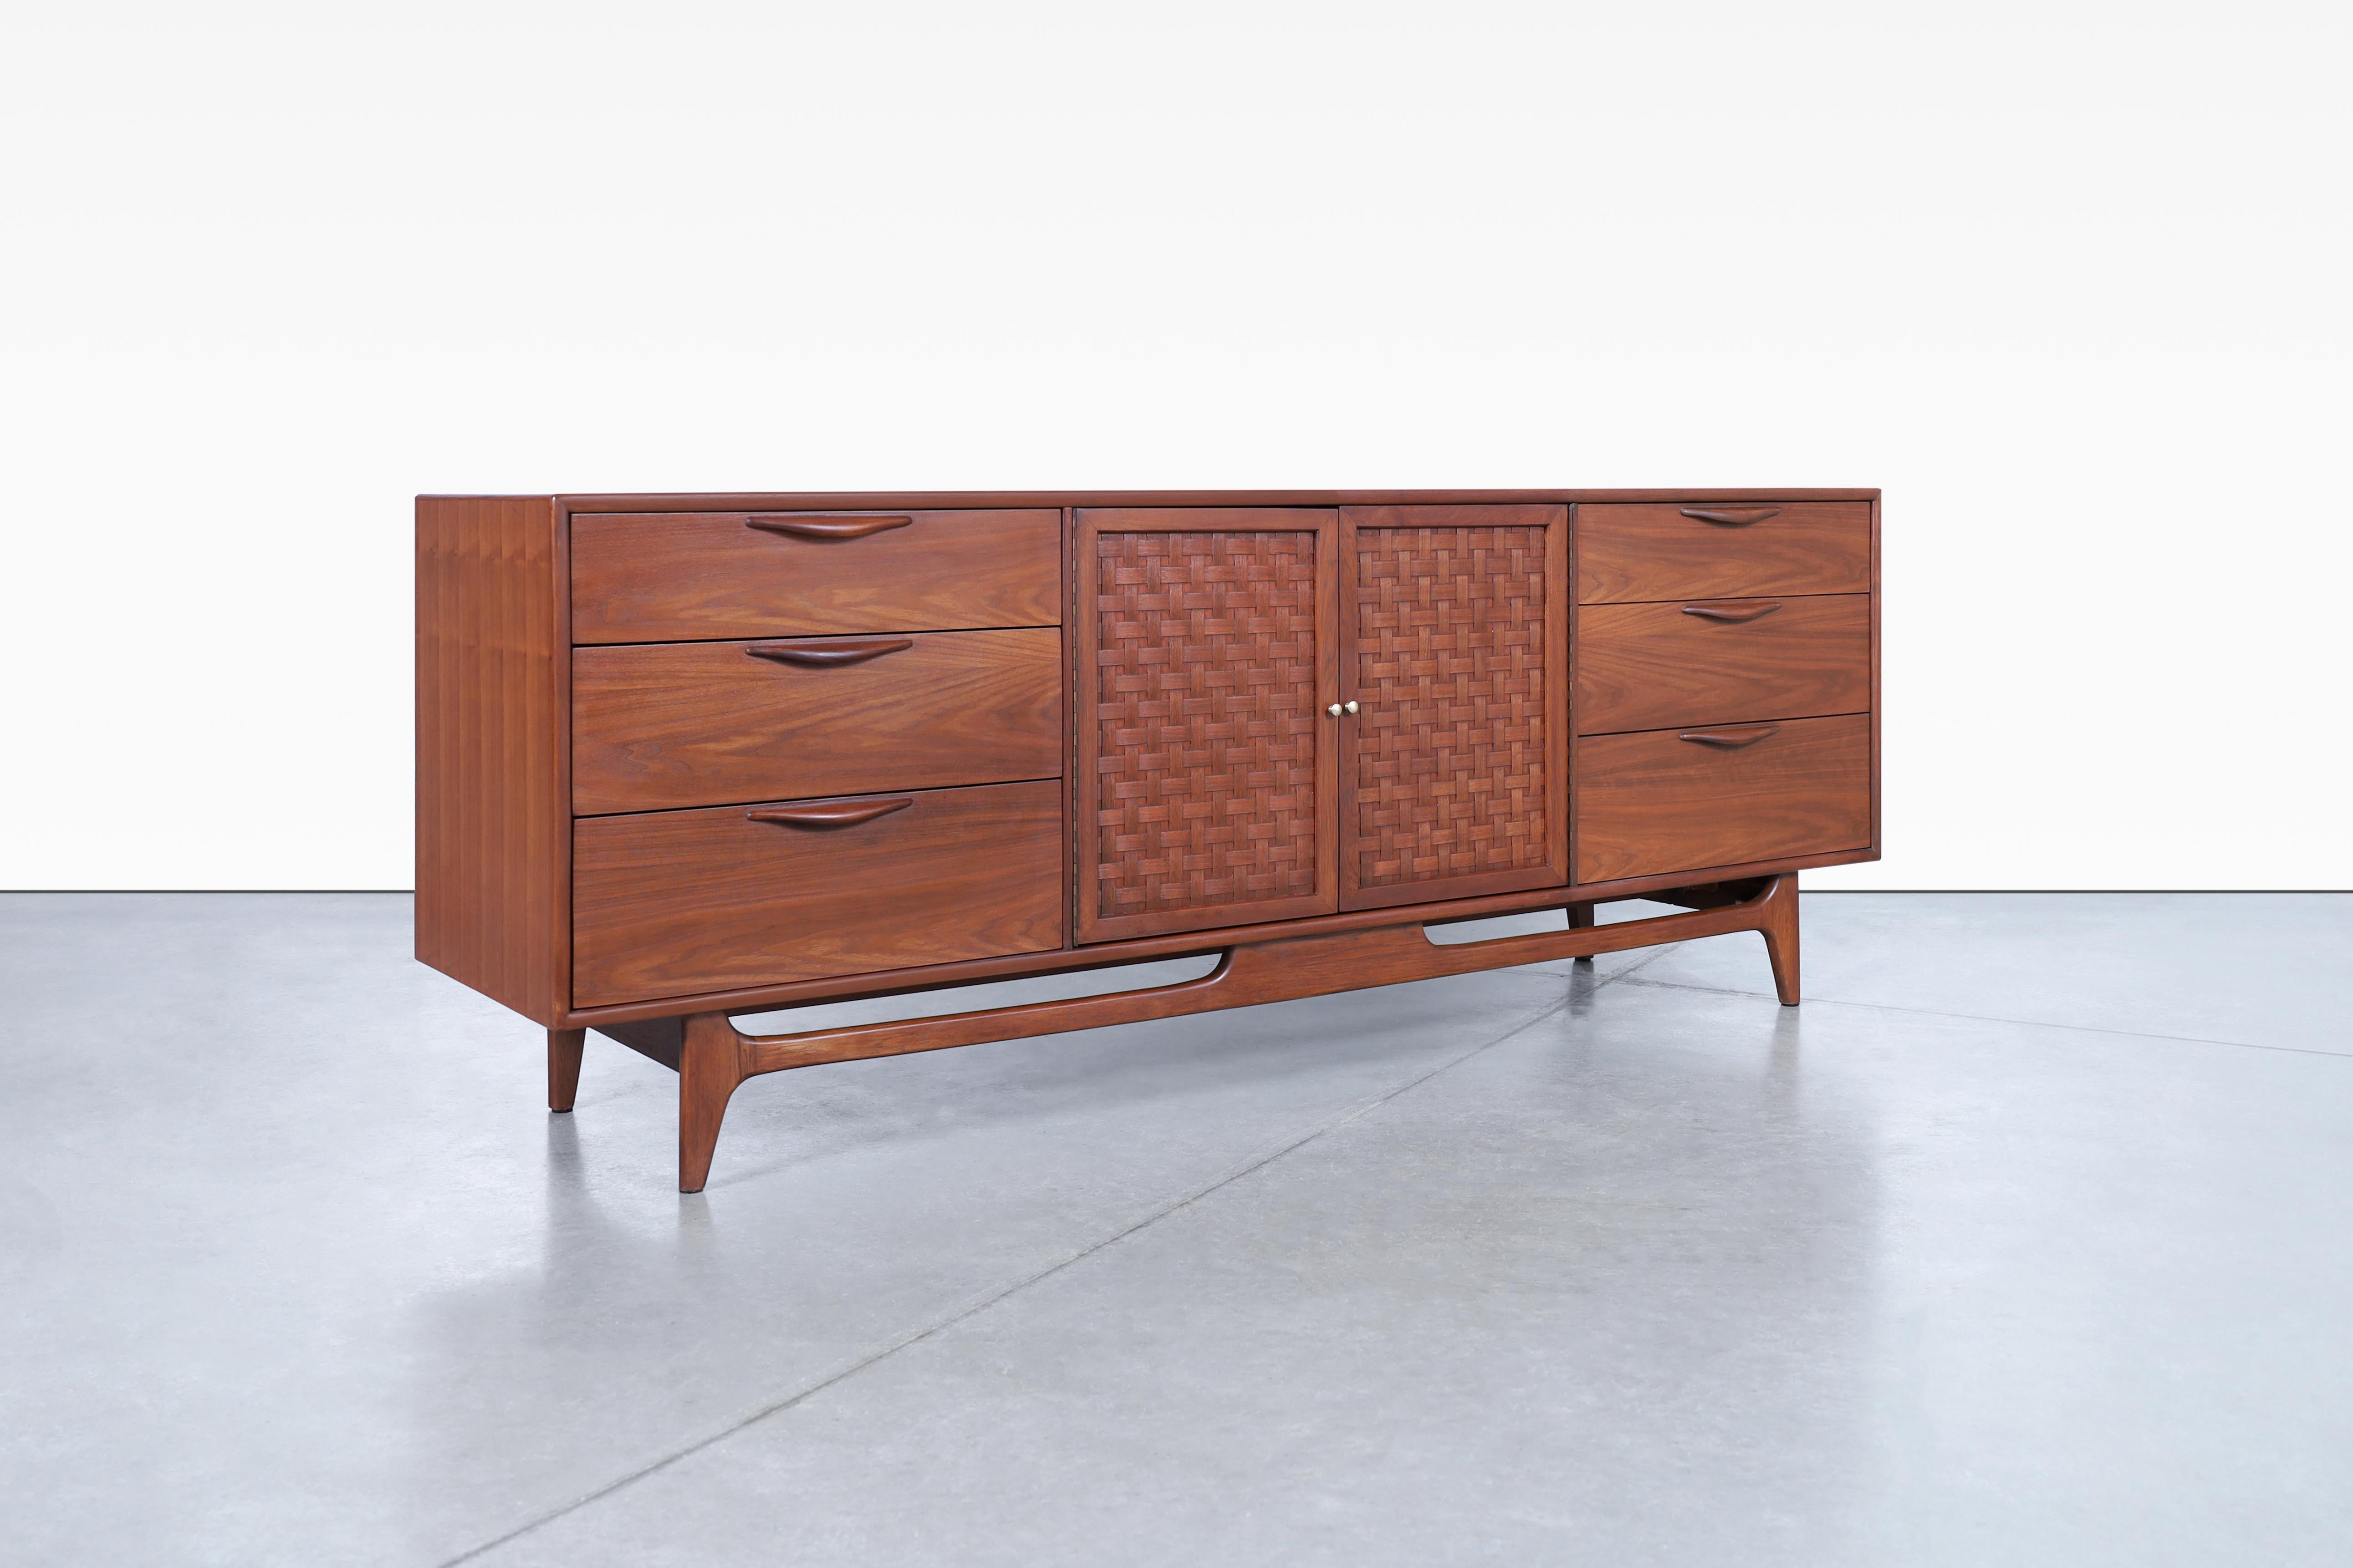 Fabulous mid century modern “perception” walnut dresser designed by Warren Church for Lane, in the United States, circa 1960’s. This stunning dresser boasts a sleek and understated design that places an emphasis on the quality of its construction